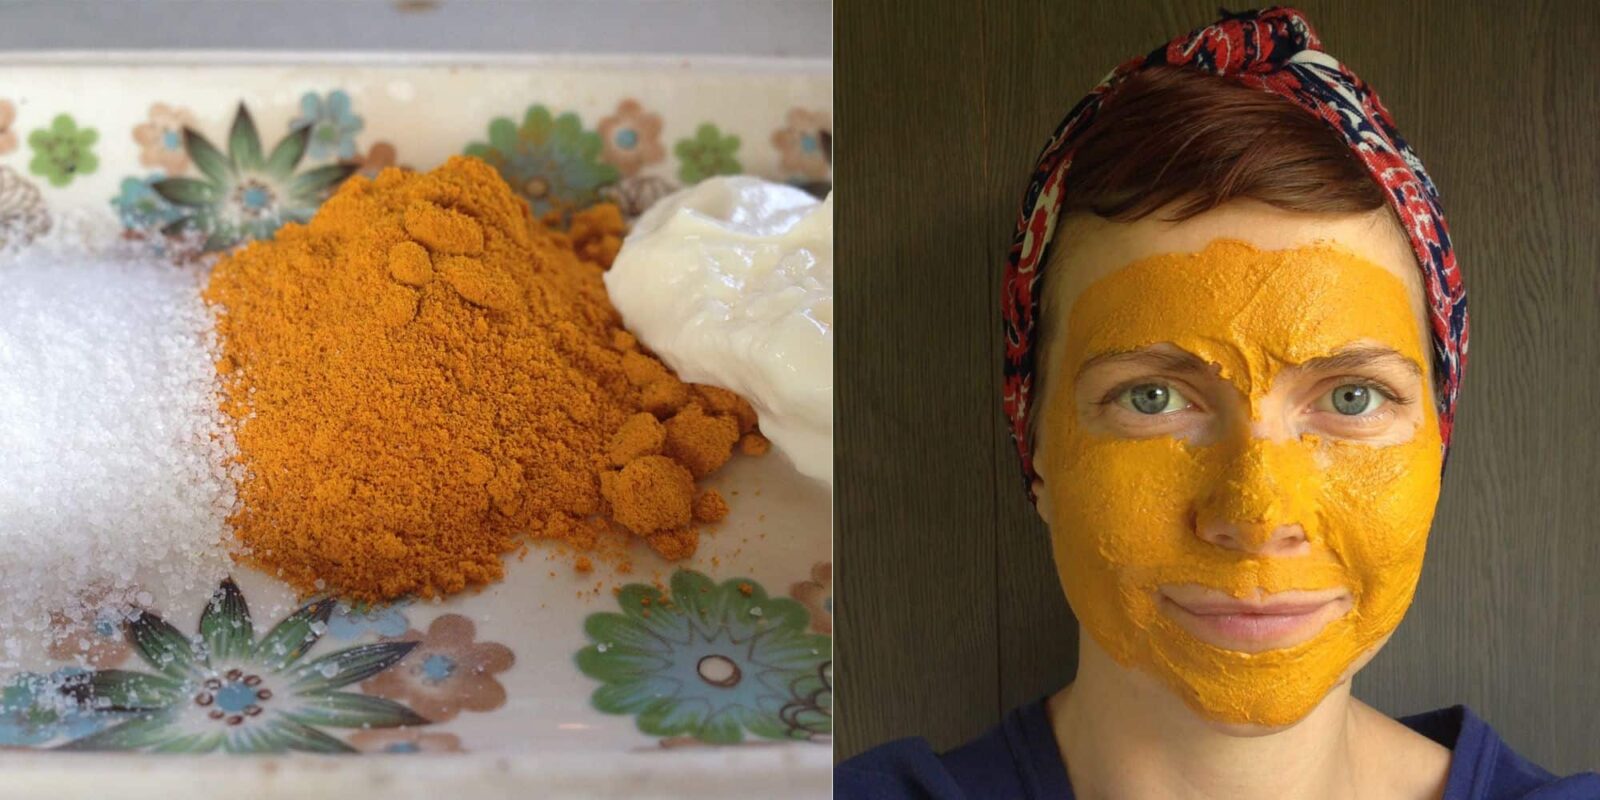 The Incredible Benefits of Turmeric for Your Redhead Skin